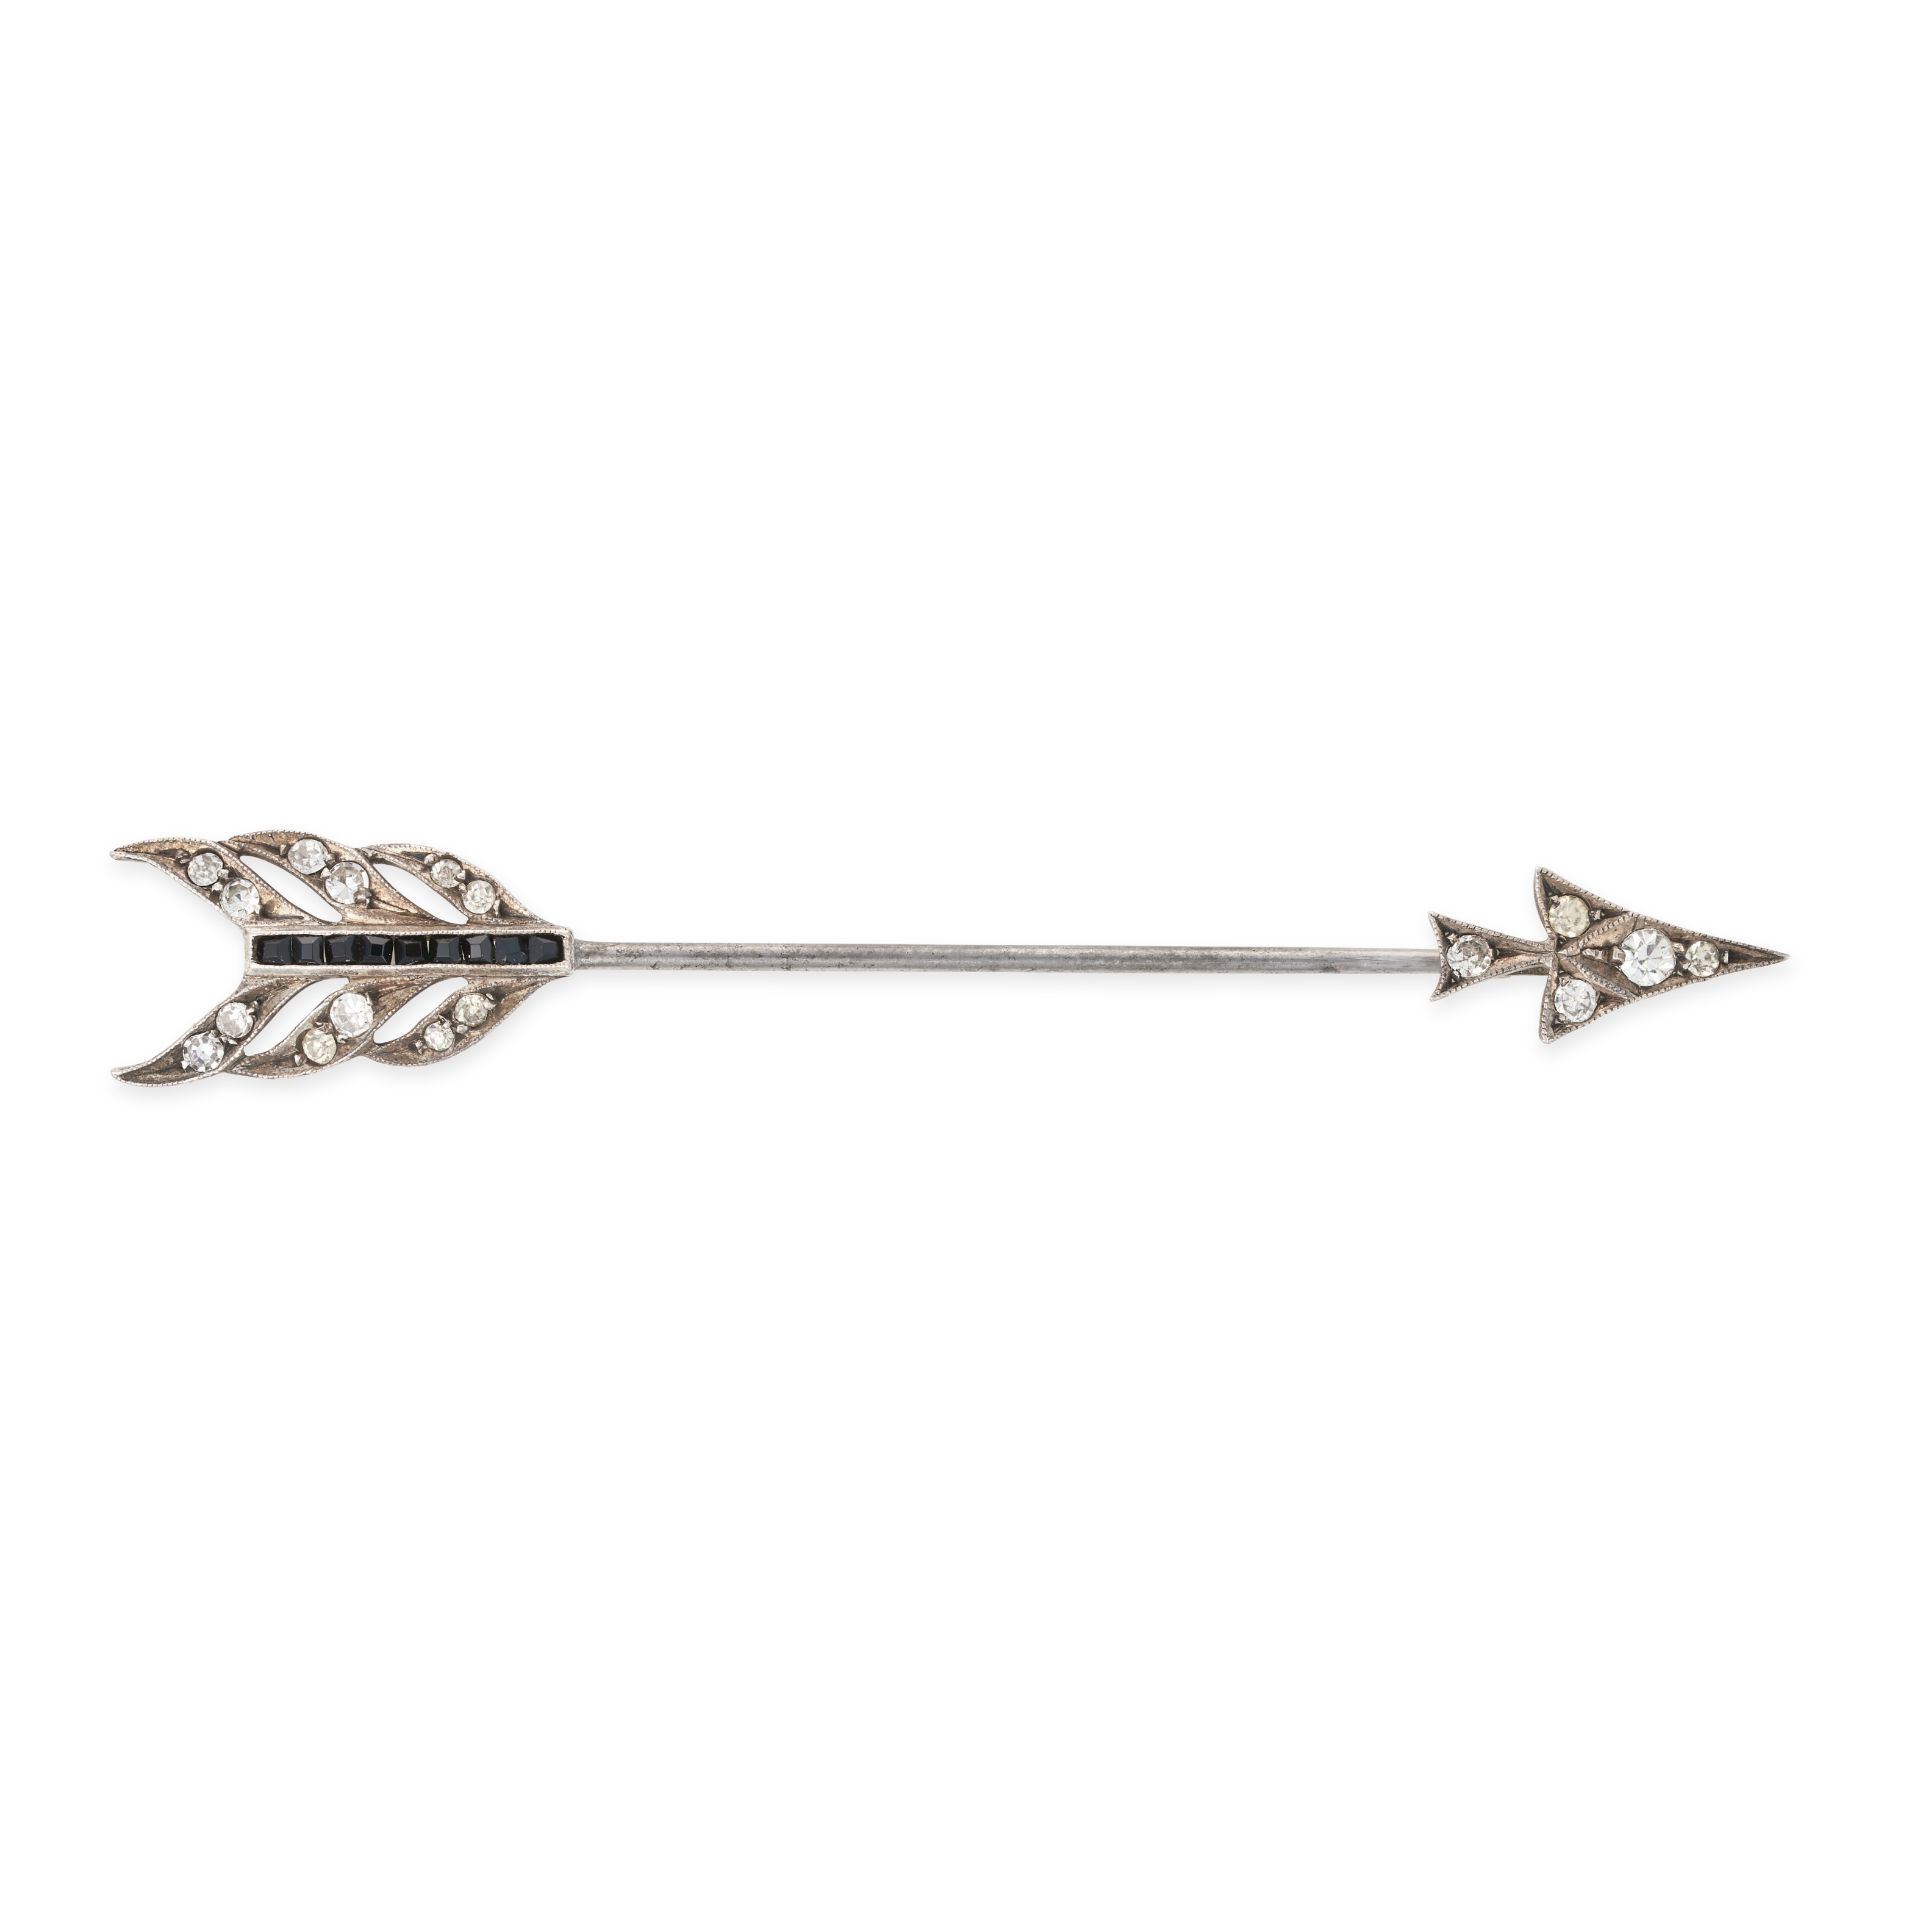 NO RESERVE - AN ANTIQUE ONYX AND PASTE JABOT PIN BROOCH designed as an arrow, the head and tail s...